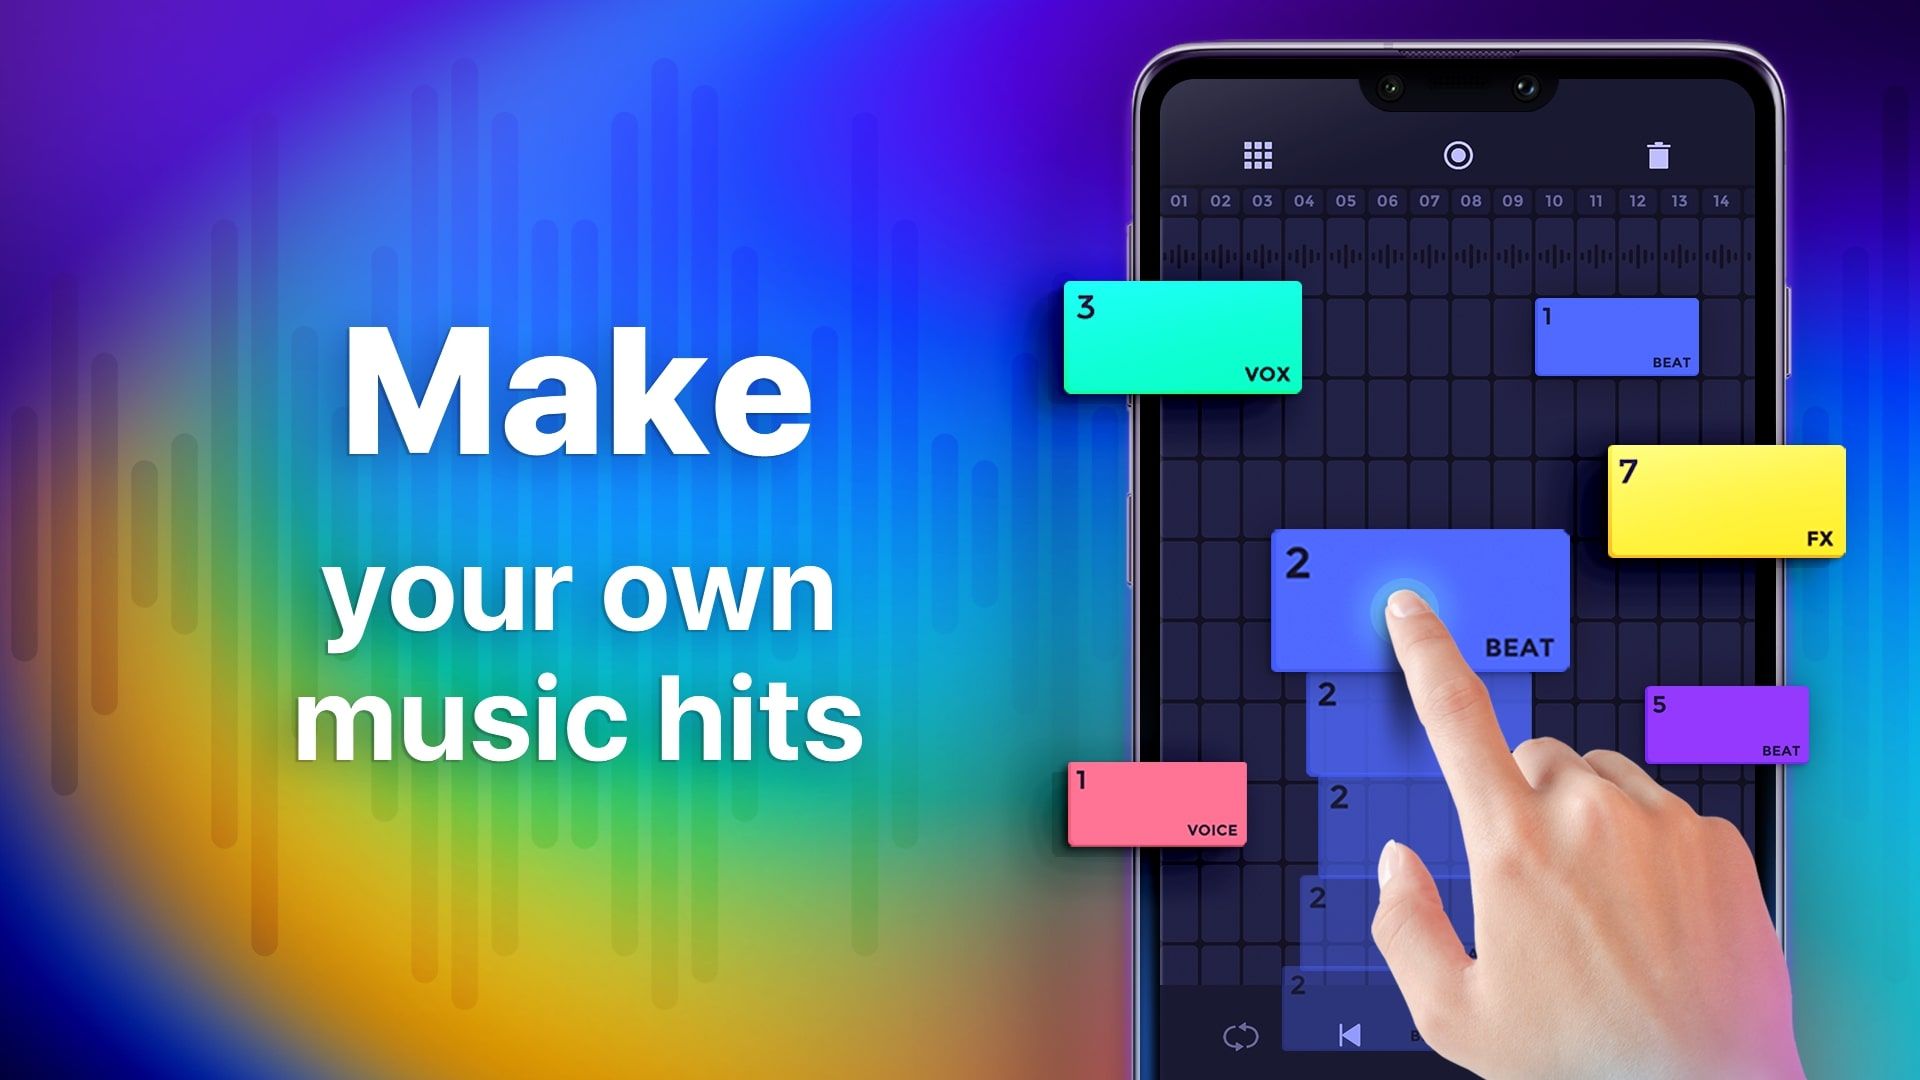 Best-dj-apps-beat-layers-make-your-own-music-hits